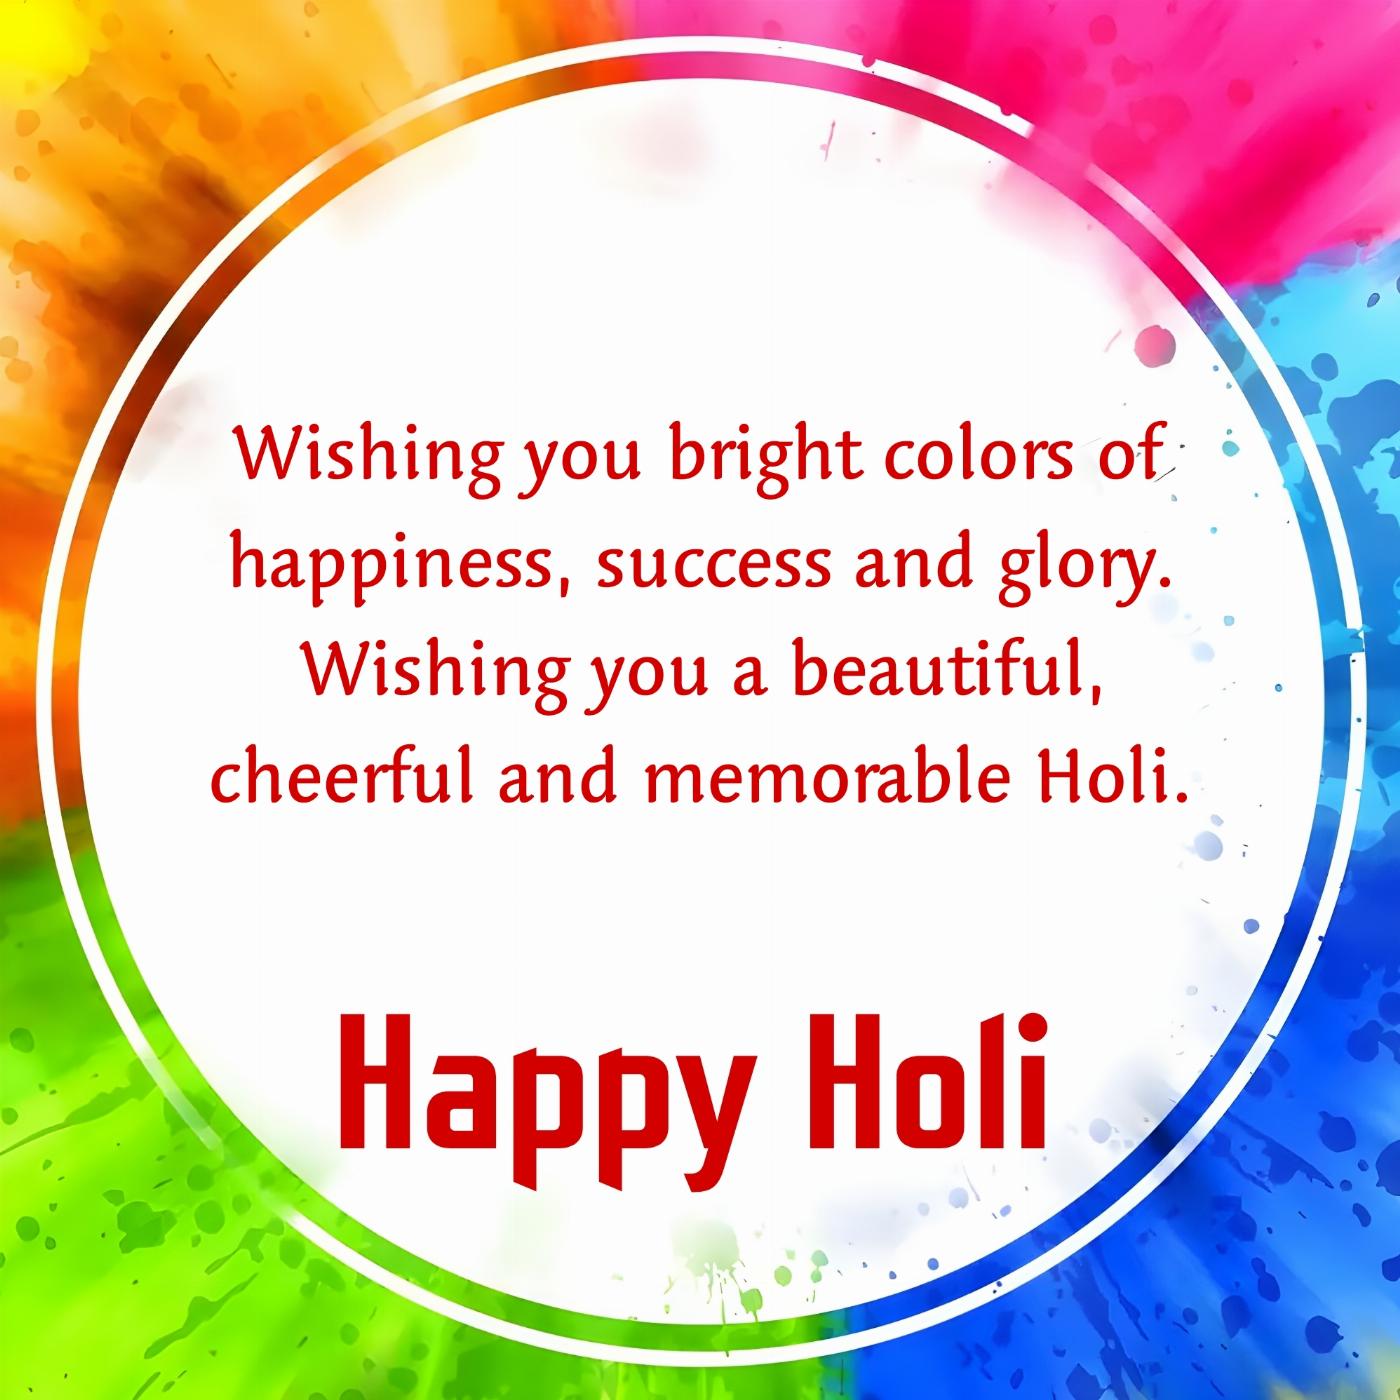 Wishing you bright colors of happiness success and glory